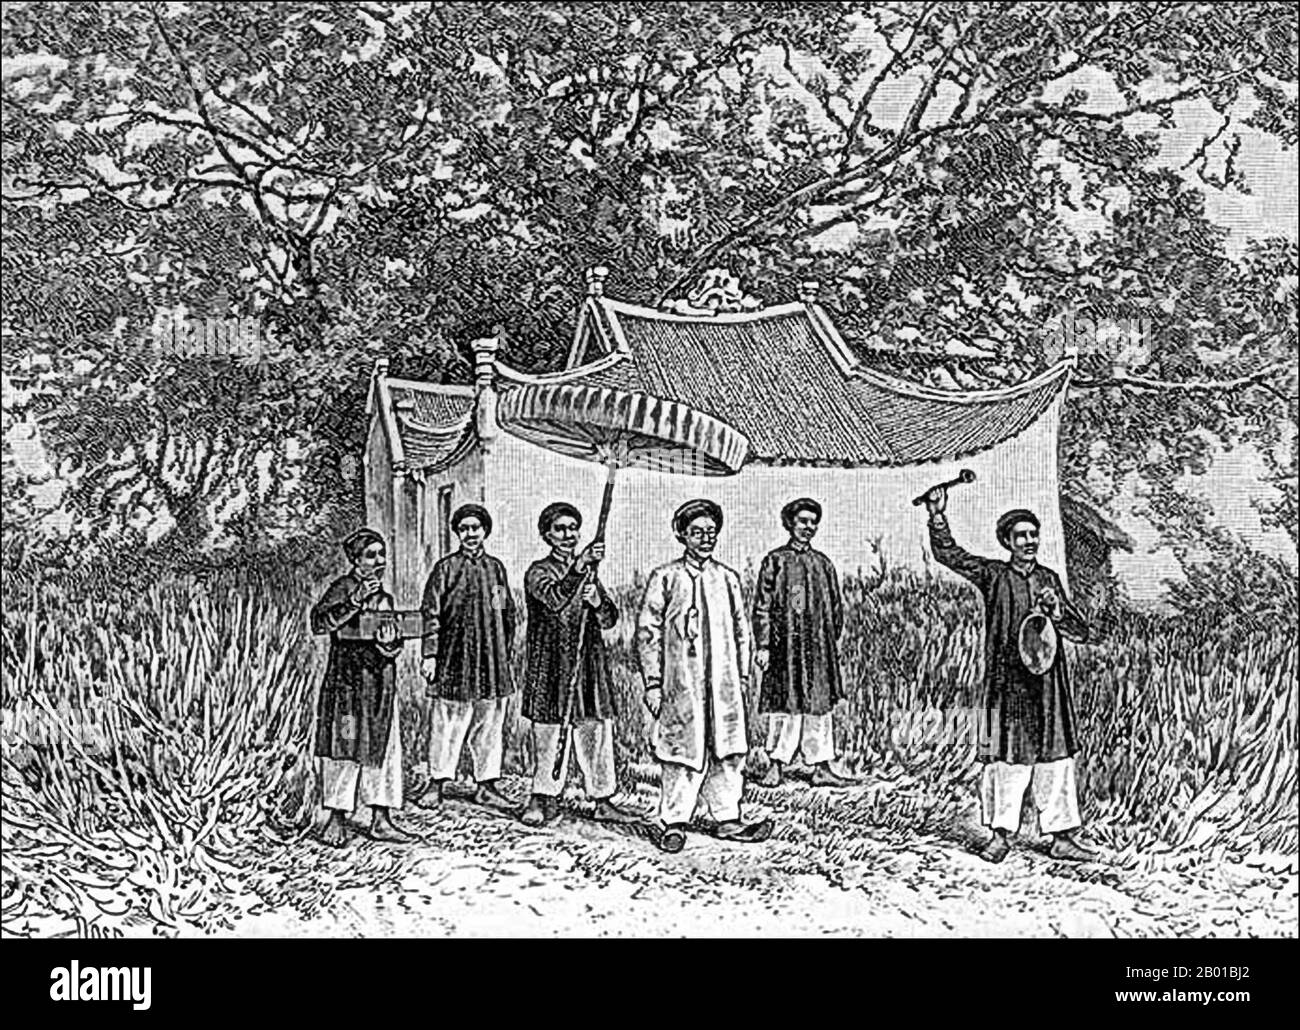 Vietnam: The Vietnamese prefect of Phu Doan. Engraving, 1884.  The Tonkin Campaign (French: Campagne du Tonkin) was an armed conflict fought between June 1883 and April 1886 by the French against, variously, the Vietnamese, Liu Yongfu's Black Flag Army and the Chinese Guangxi and Yunnan armies to occupy Tonkin (northern Vietnam) and entrench a French protectorate there. Stock Photo